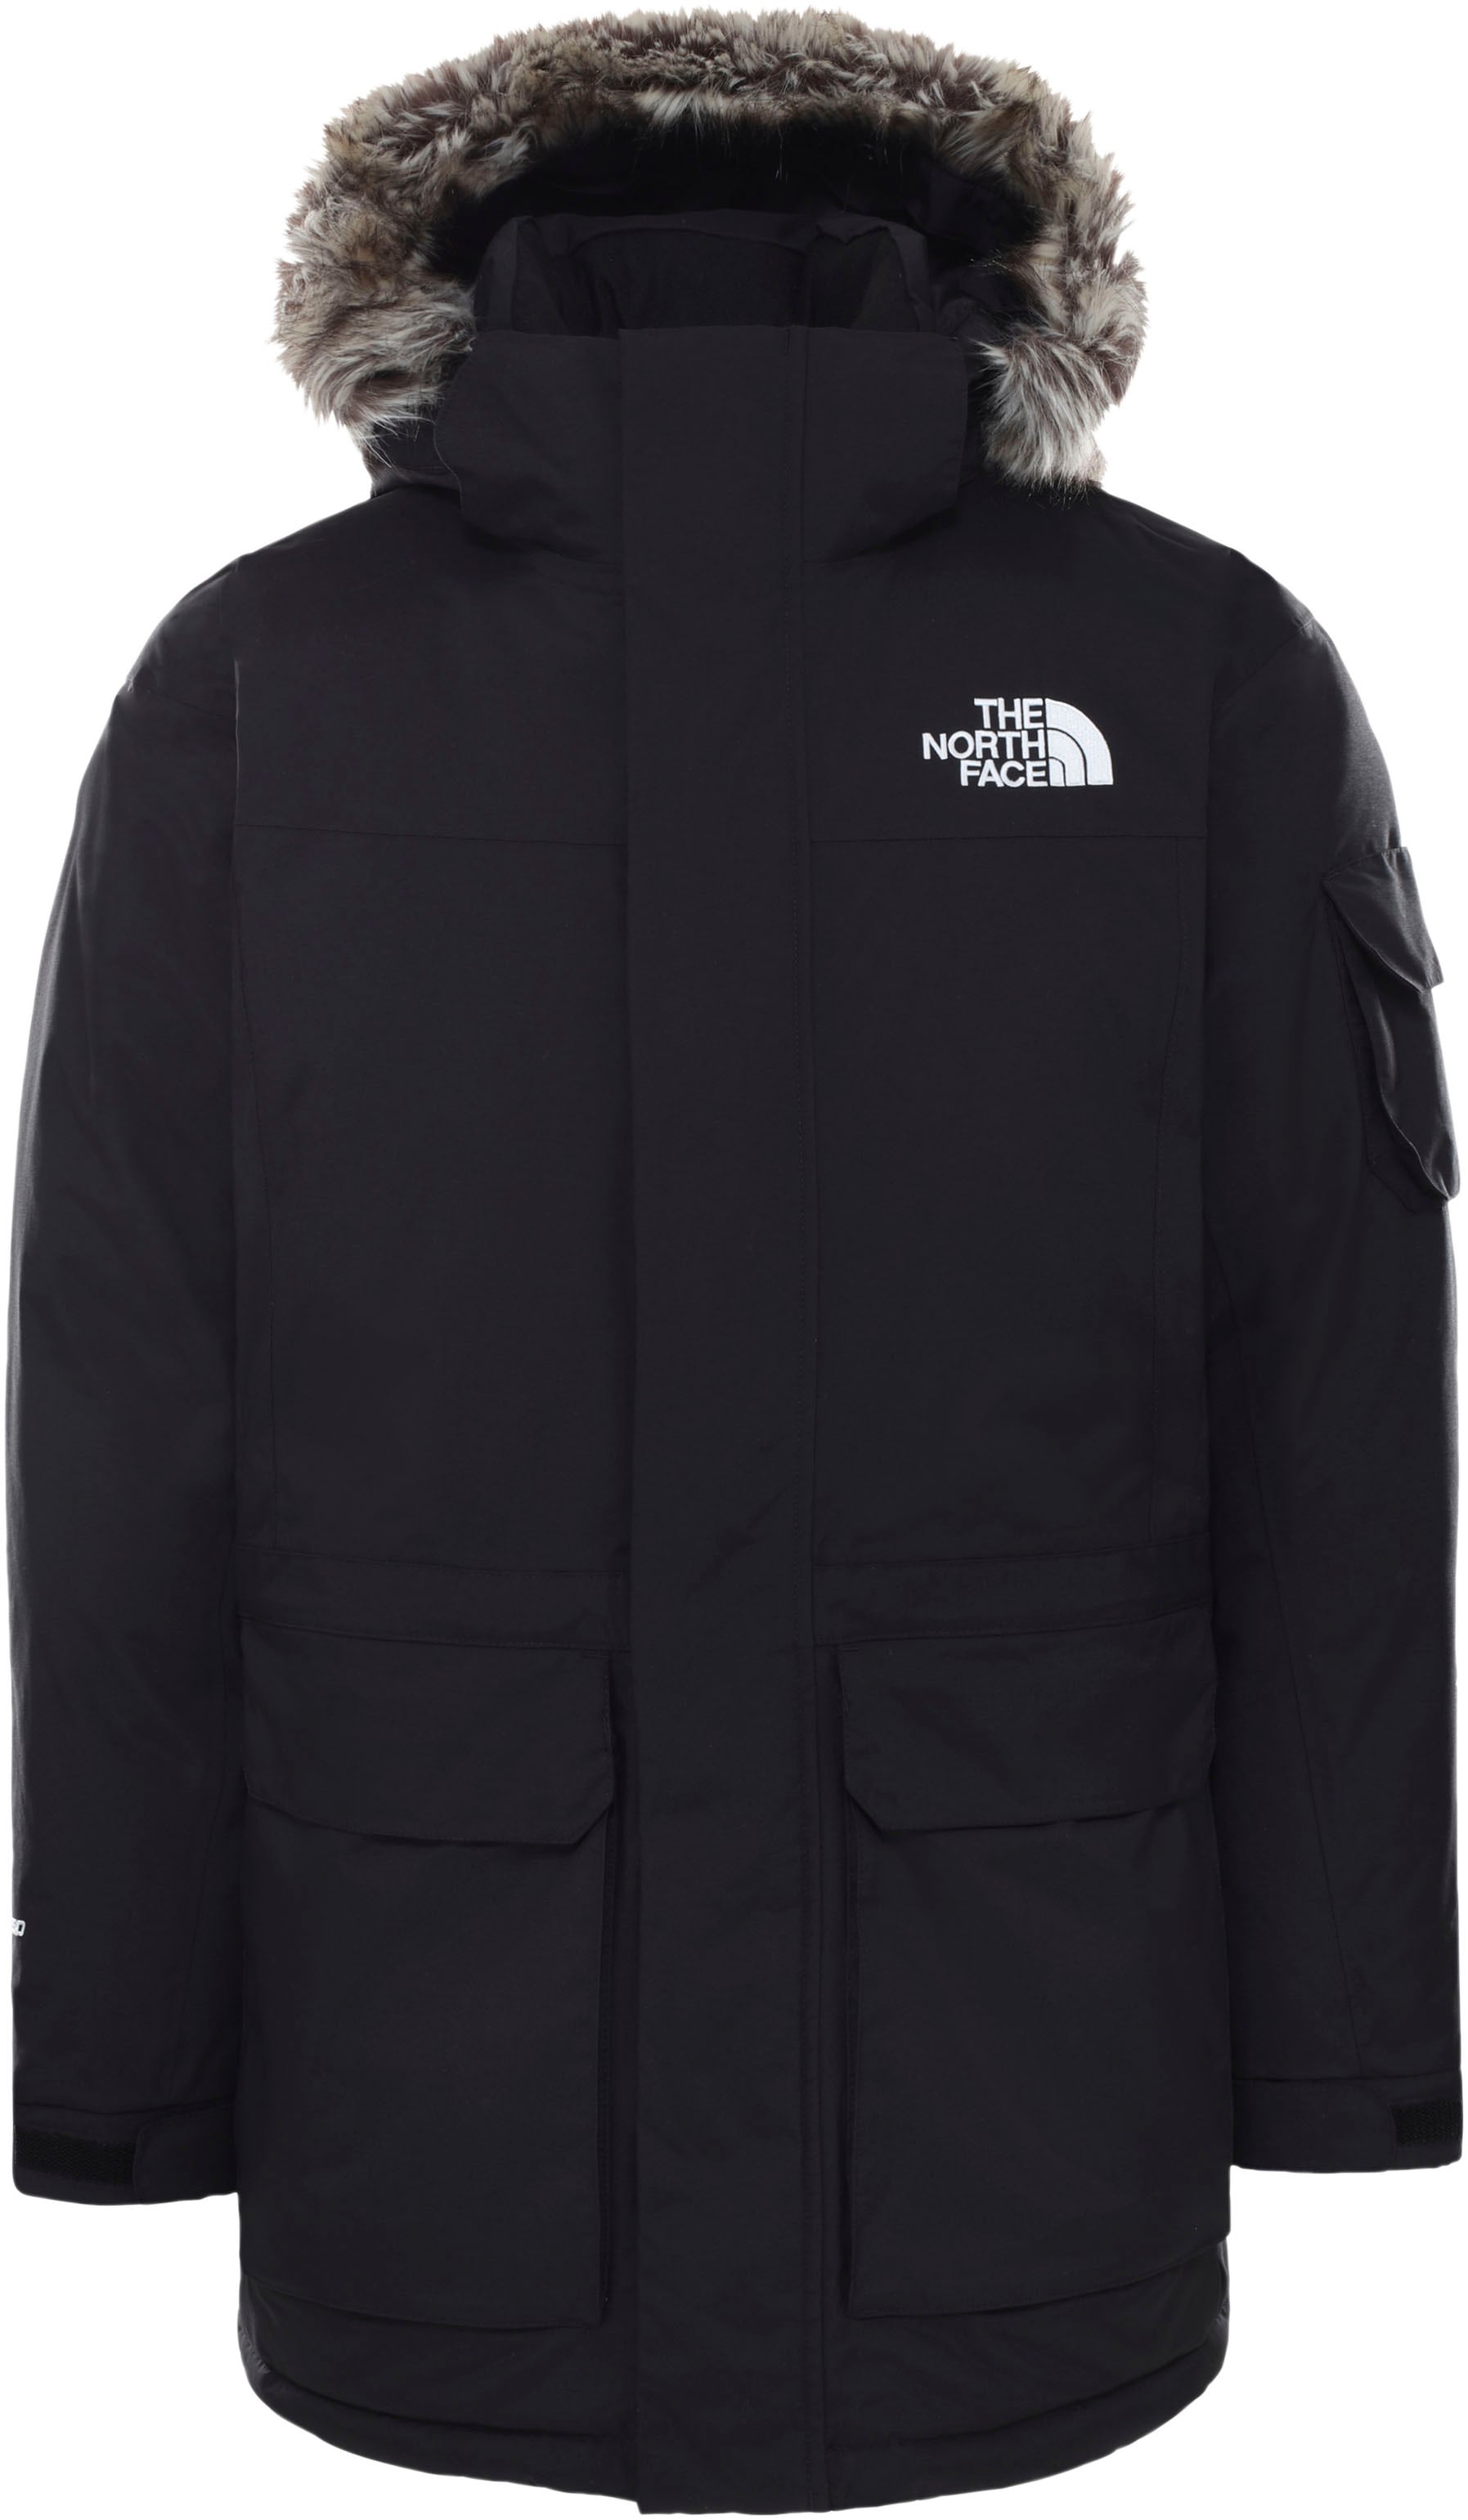 The North Face Parka »RECYCLED MCMURDO« su Kapuze Atm...